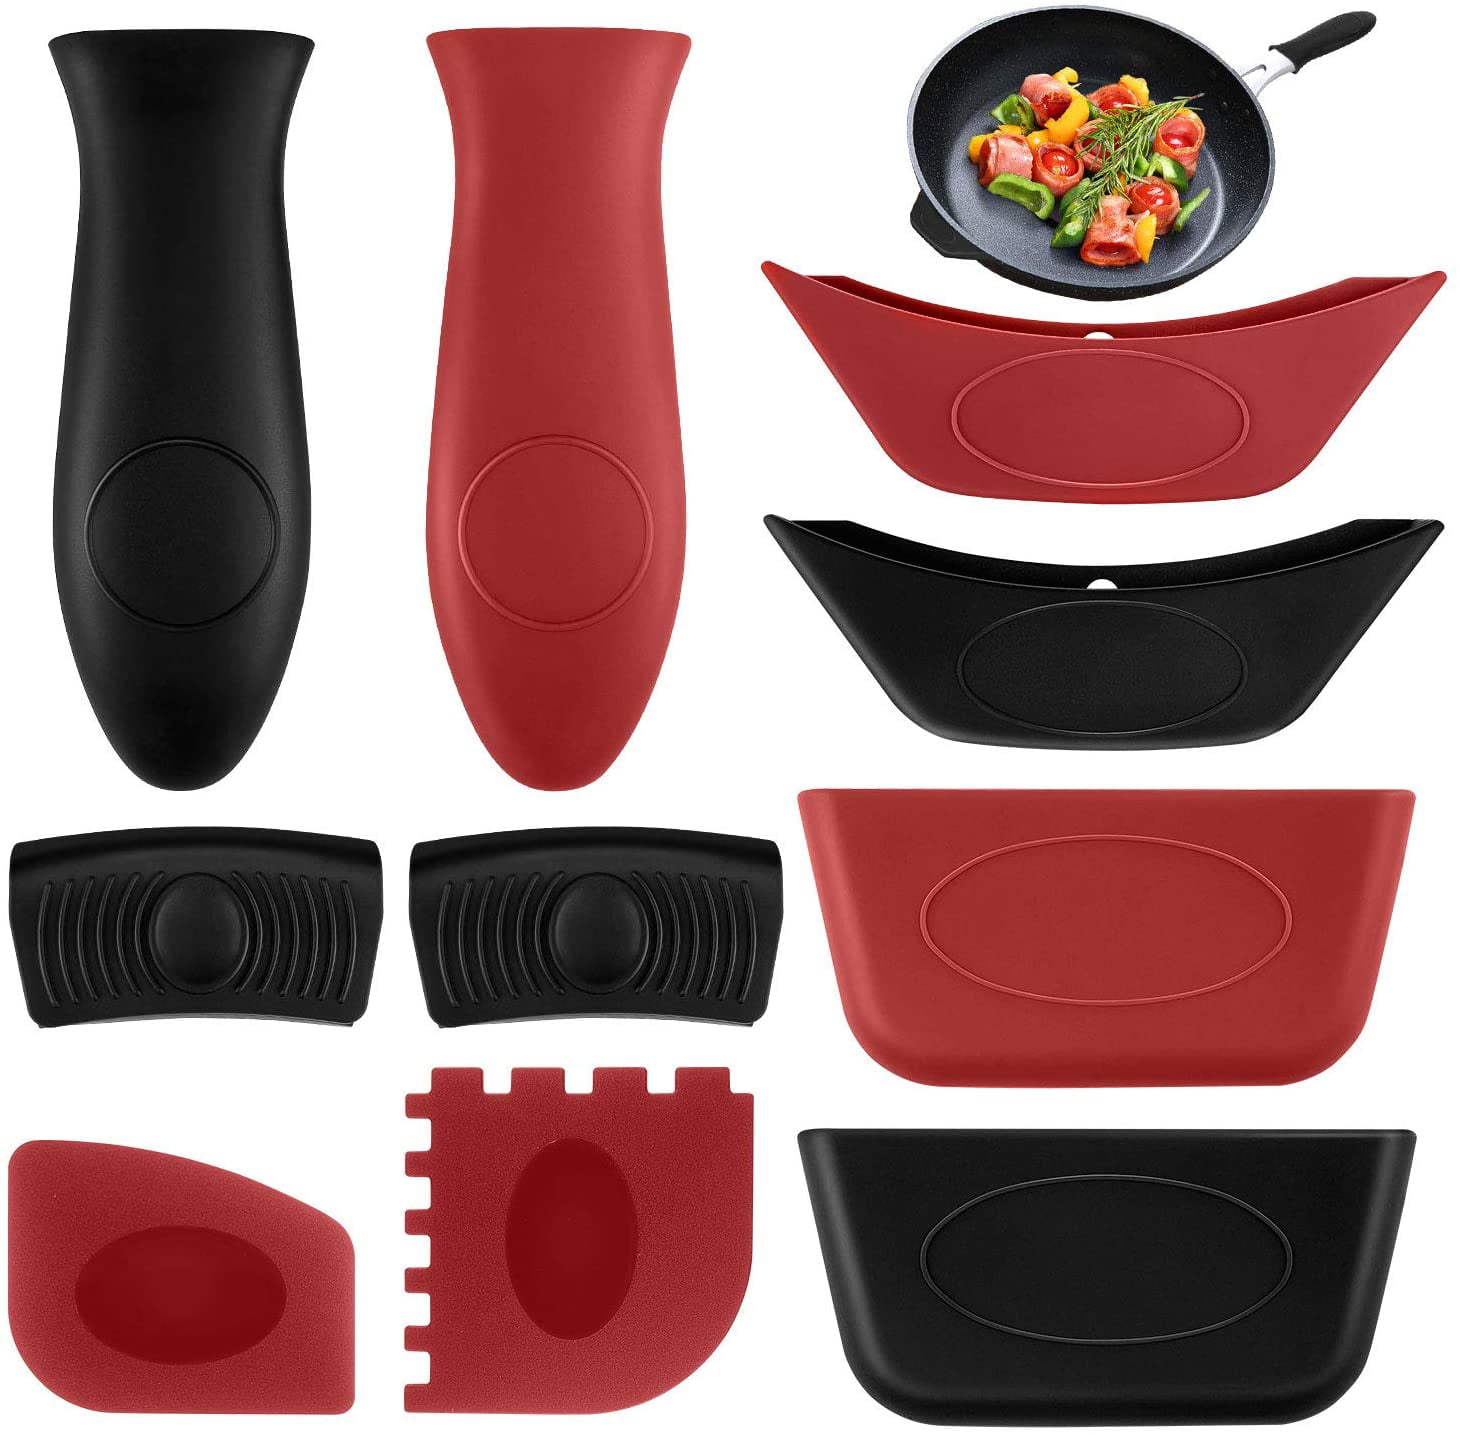 10PCS Silicone Hot Handle Holders Kit and Pot Holders Cover Removable Hot Resistant Pot Holder Handle Sleeves Lid Covers for Cast Iron Skillets Metal Frying Pans Aluminum Cookware Black Scraper 